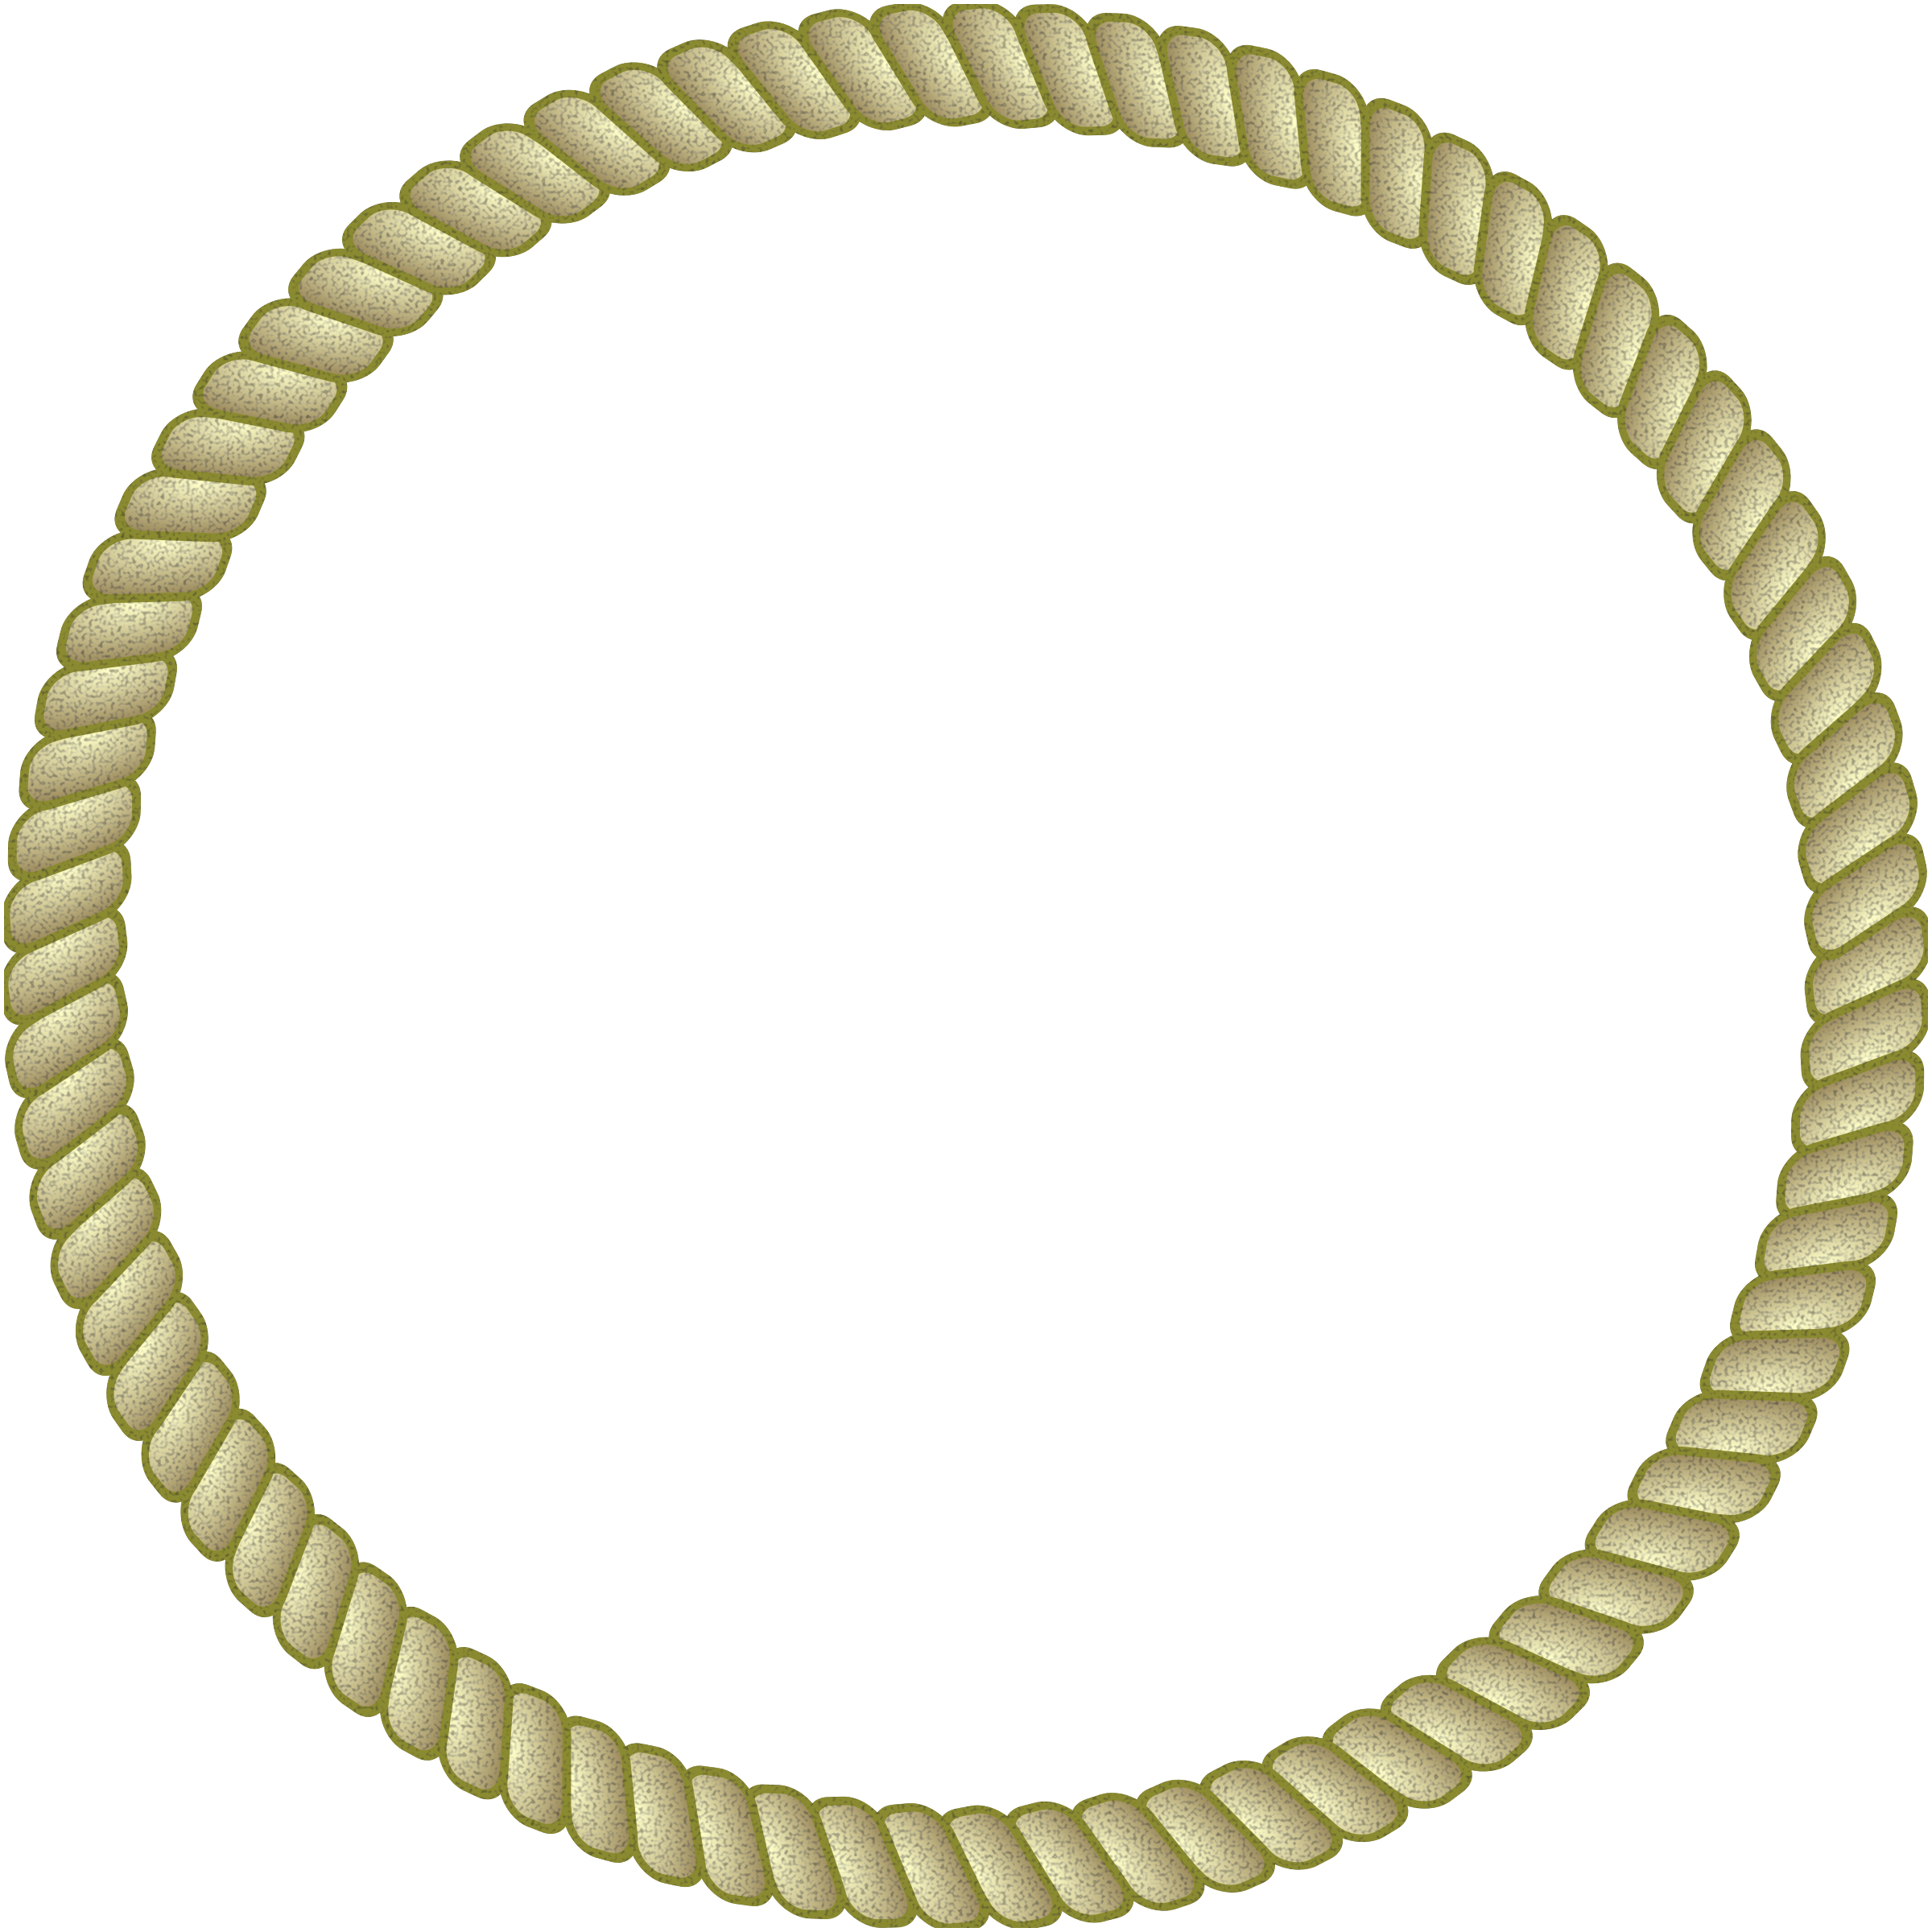 rope frame clipart - photo #27